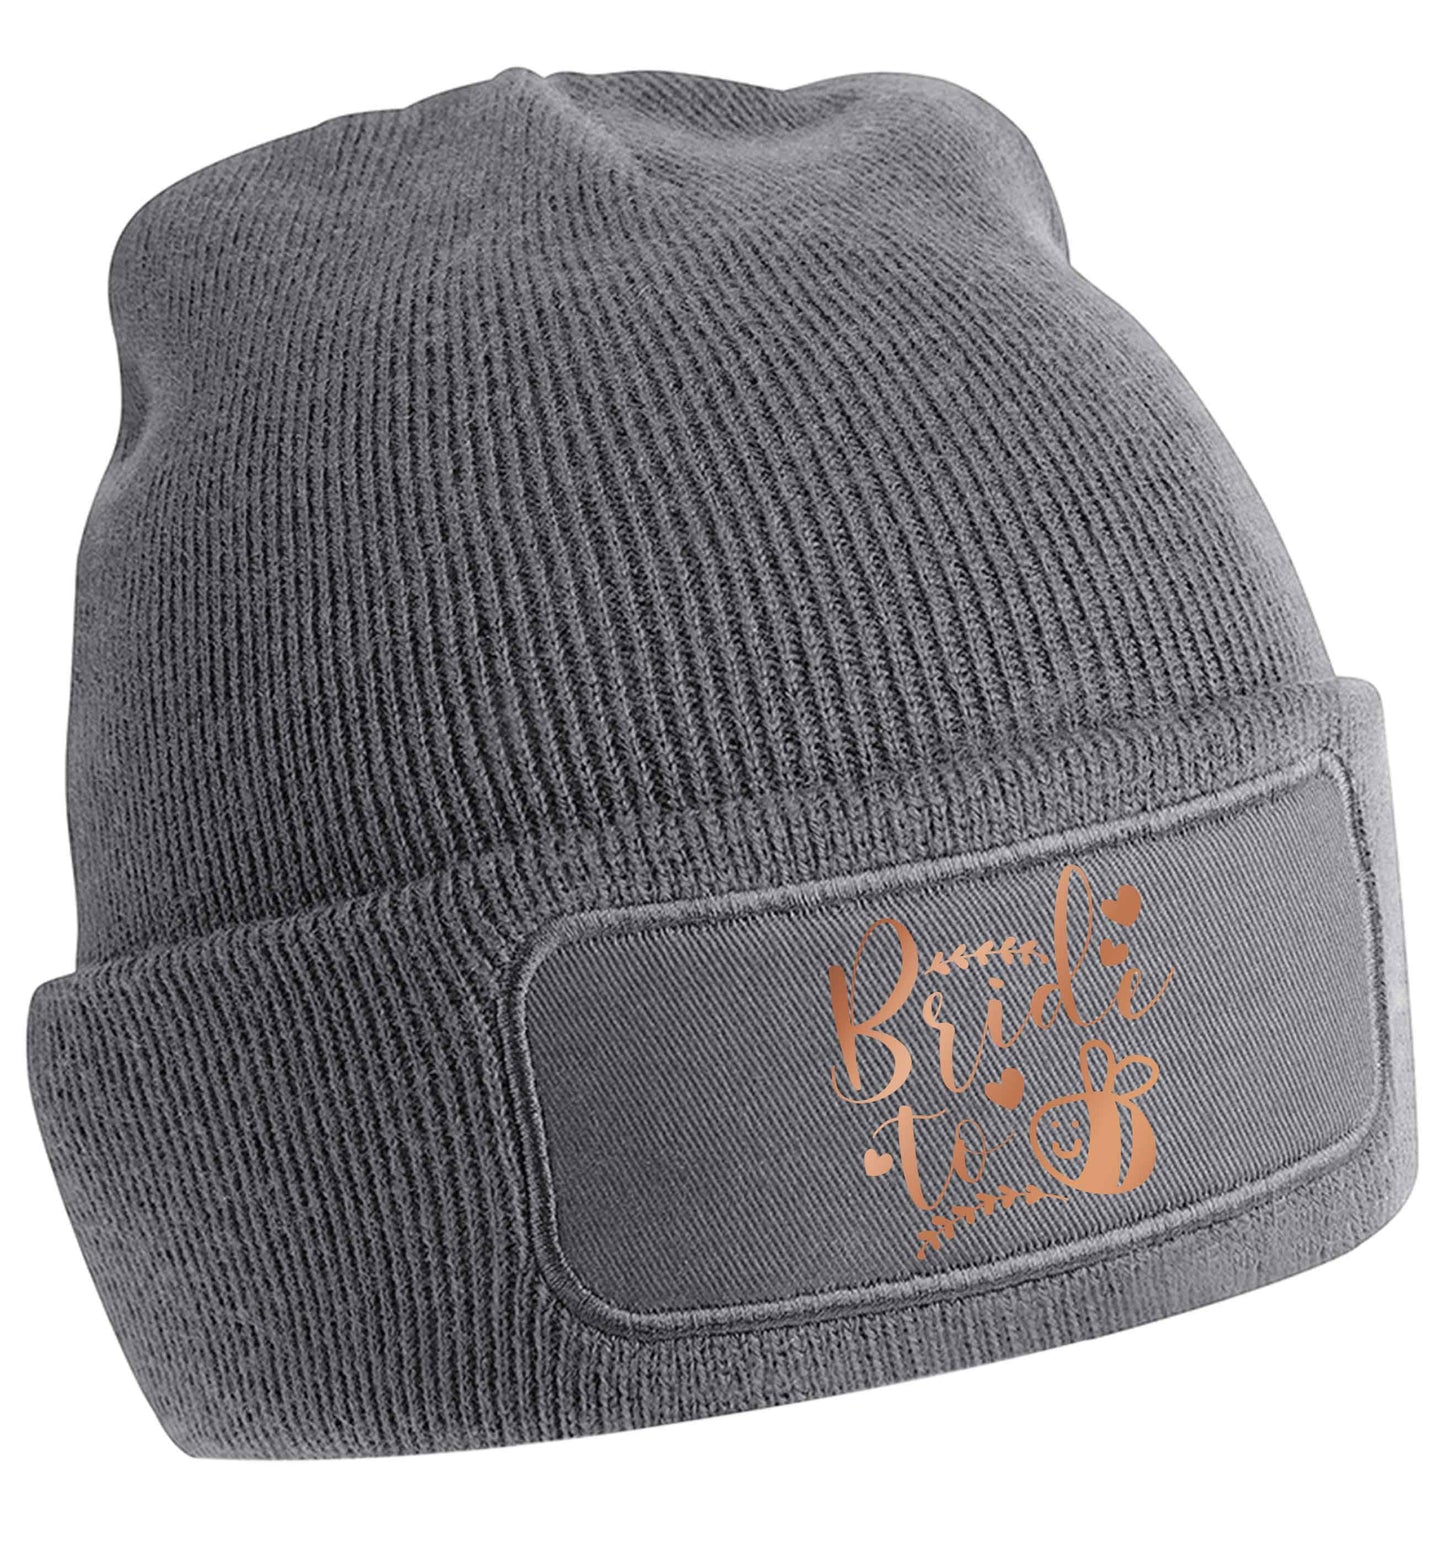 Rose gold bride to bee | Beanie hat